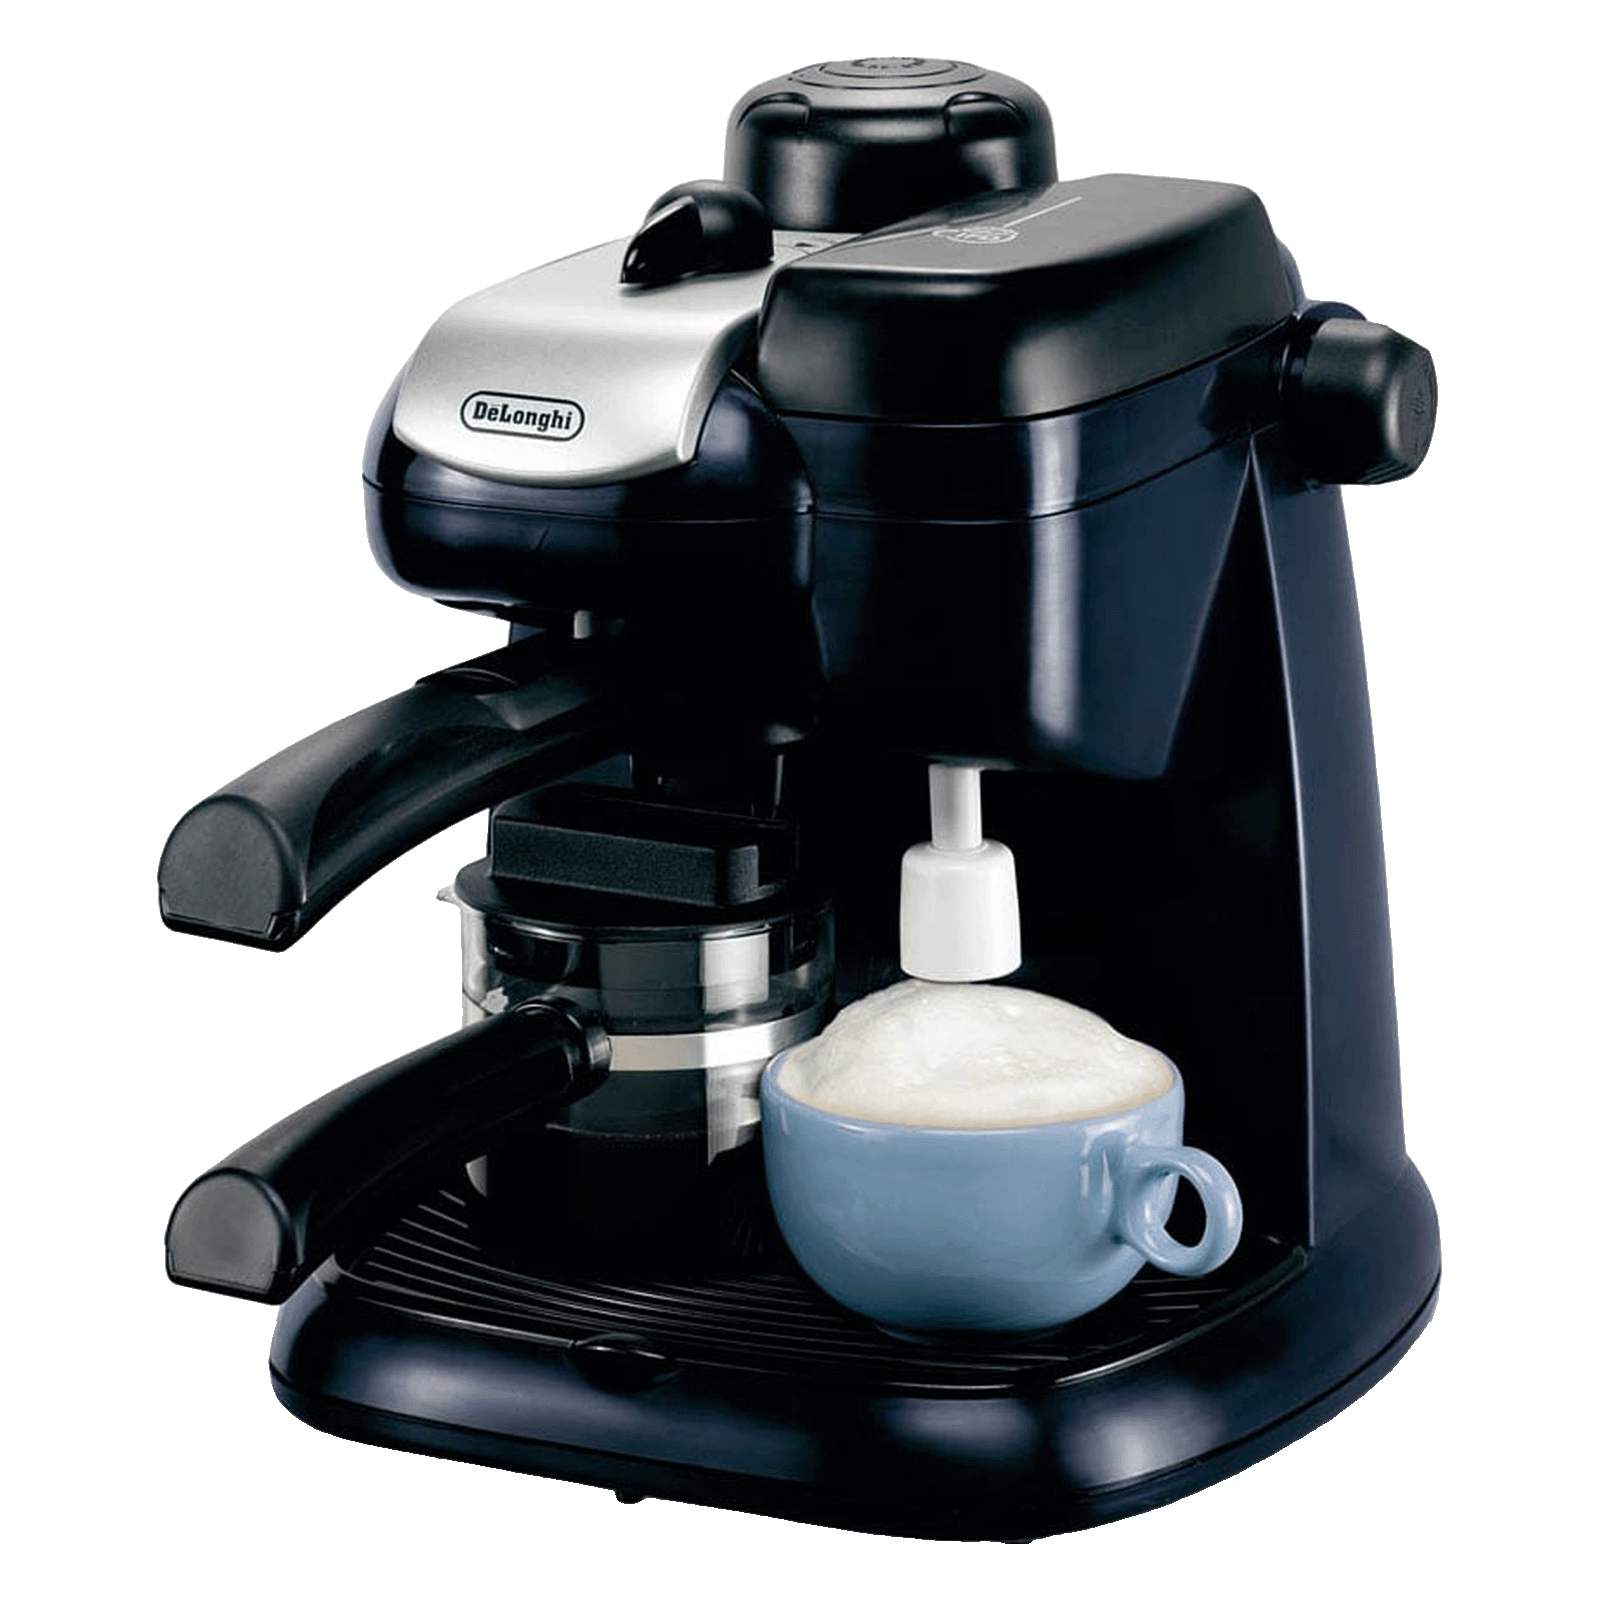 DeLonghi EC9 4 Cups Fully Automatic Coffee Maker (Makes Cappuccino, Vario System, 132007048, Black)_1